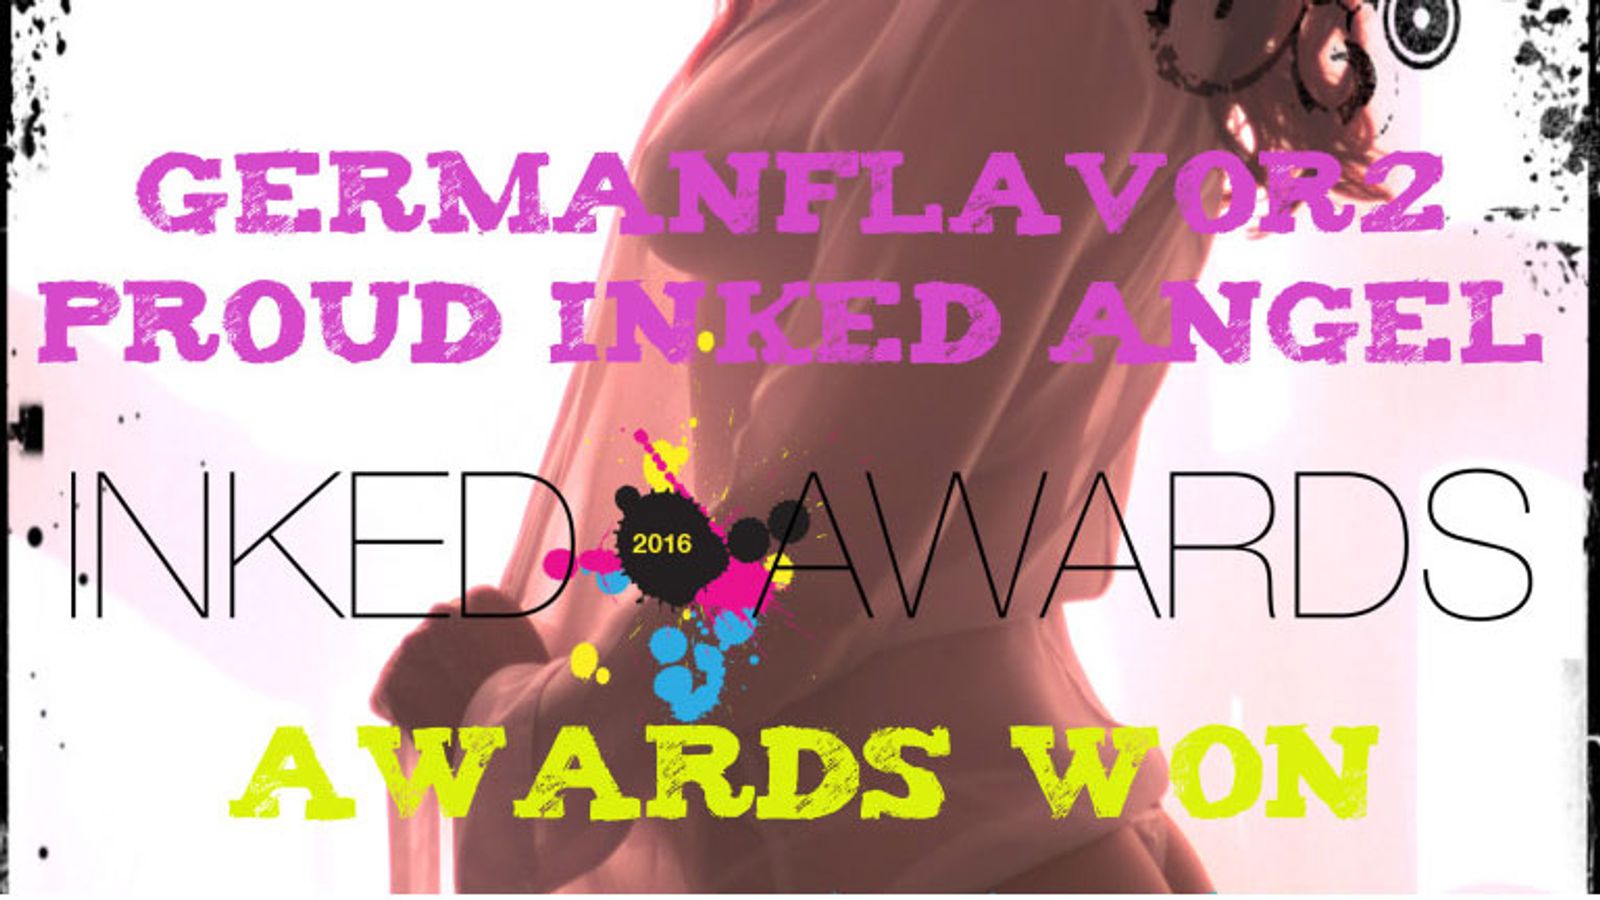 Chaturbate 'Caster German Flavor Won Two Honors At 2016 Inked Awards